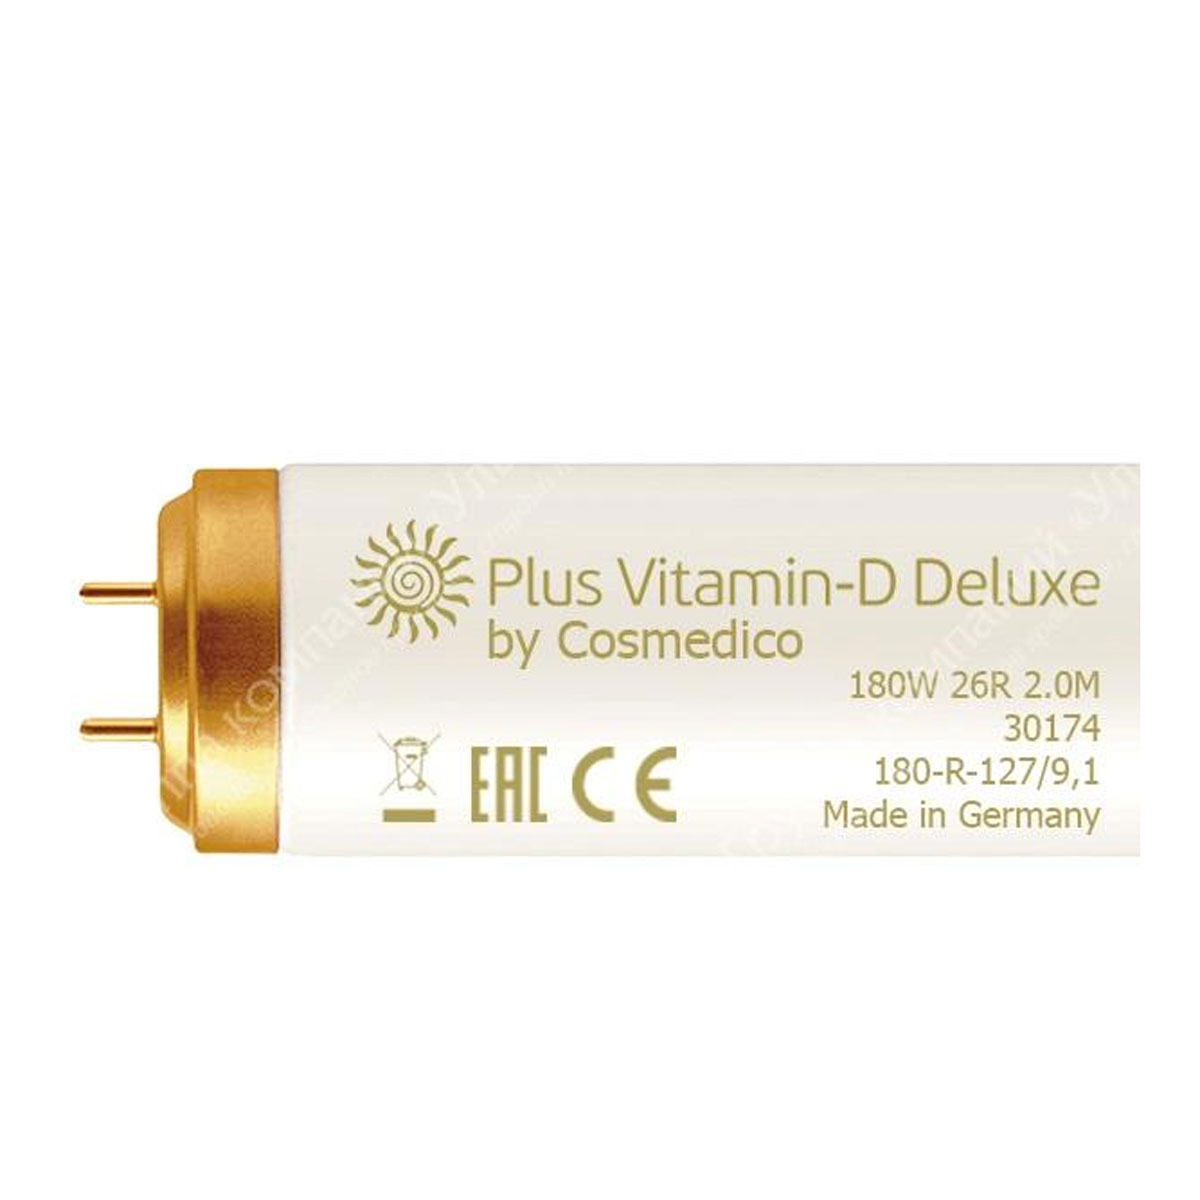 Plus Vitamin-D Deluxe 26R 160W by Cosmedico